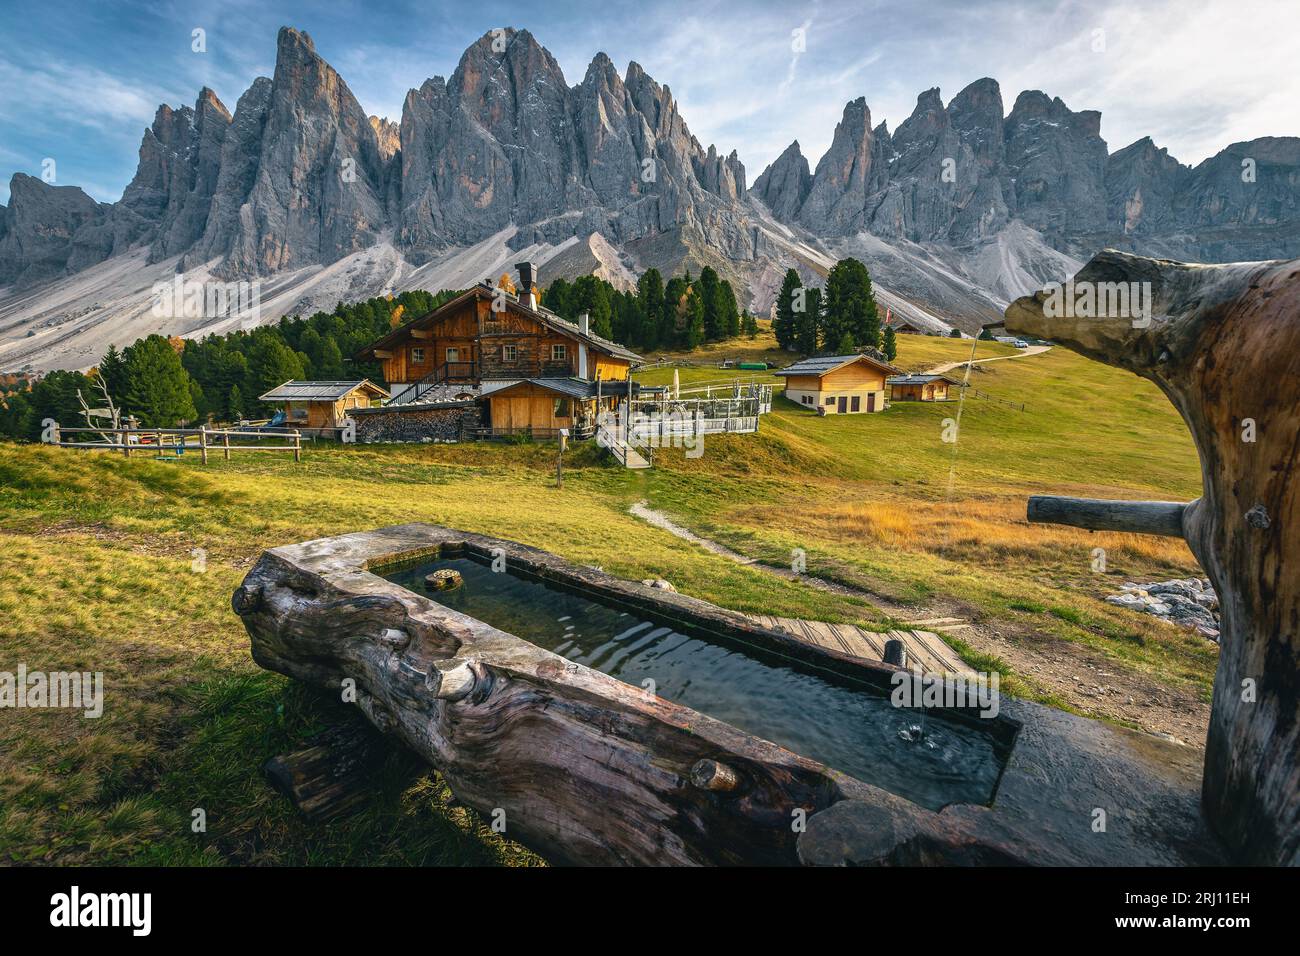 Small wooden well and cute chalets on the slope with spectacular high lacy peaks in background, Geisler - Odle mountain group, Alto Adige, Dolomites, Stock Photo